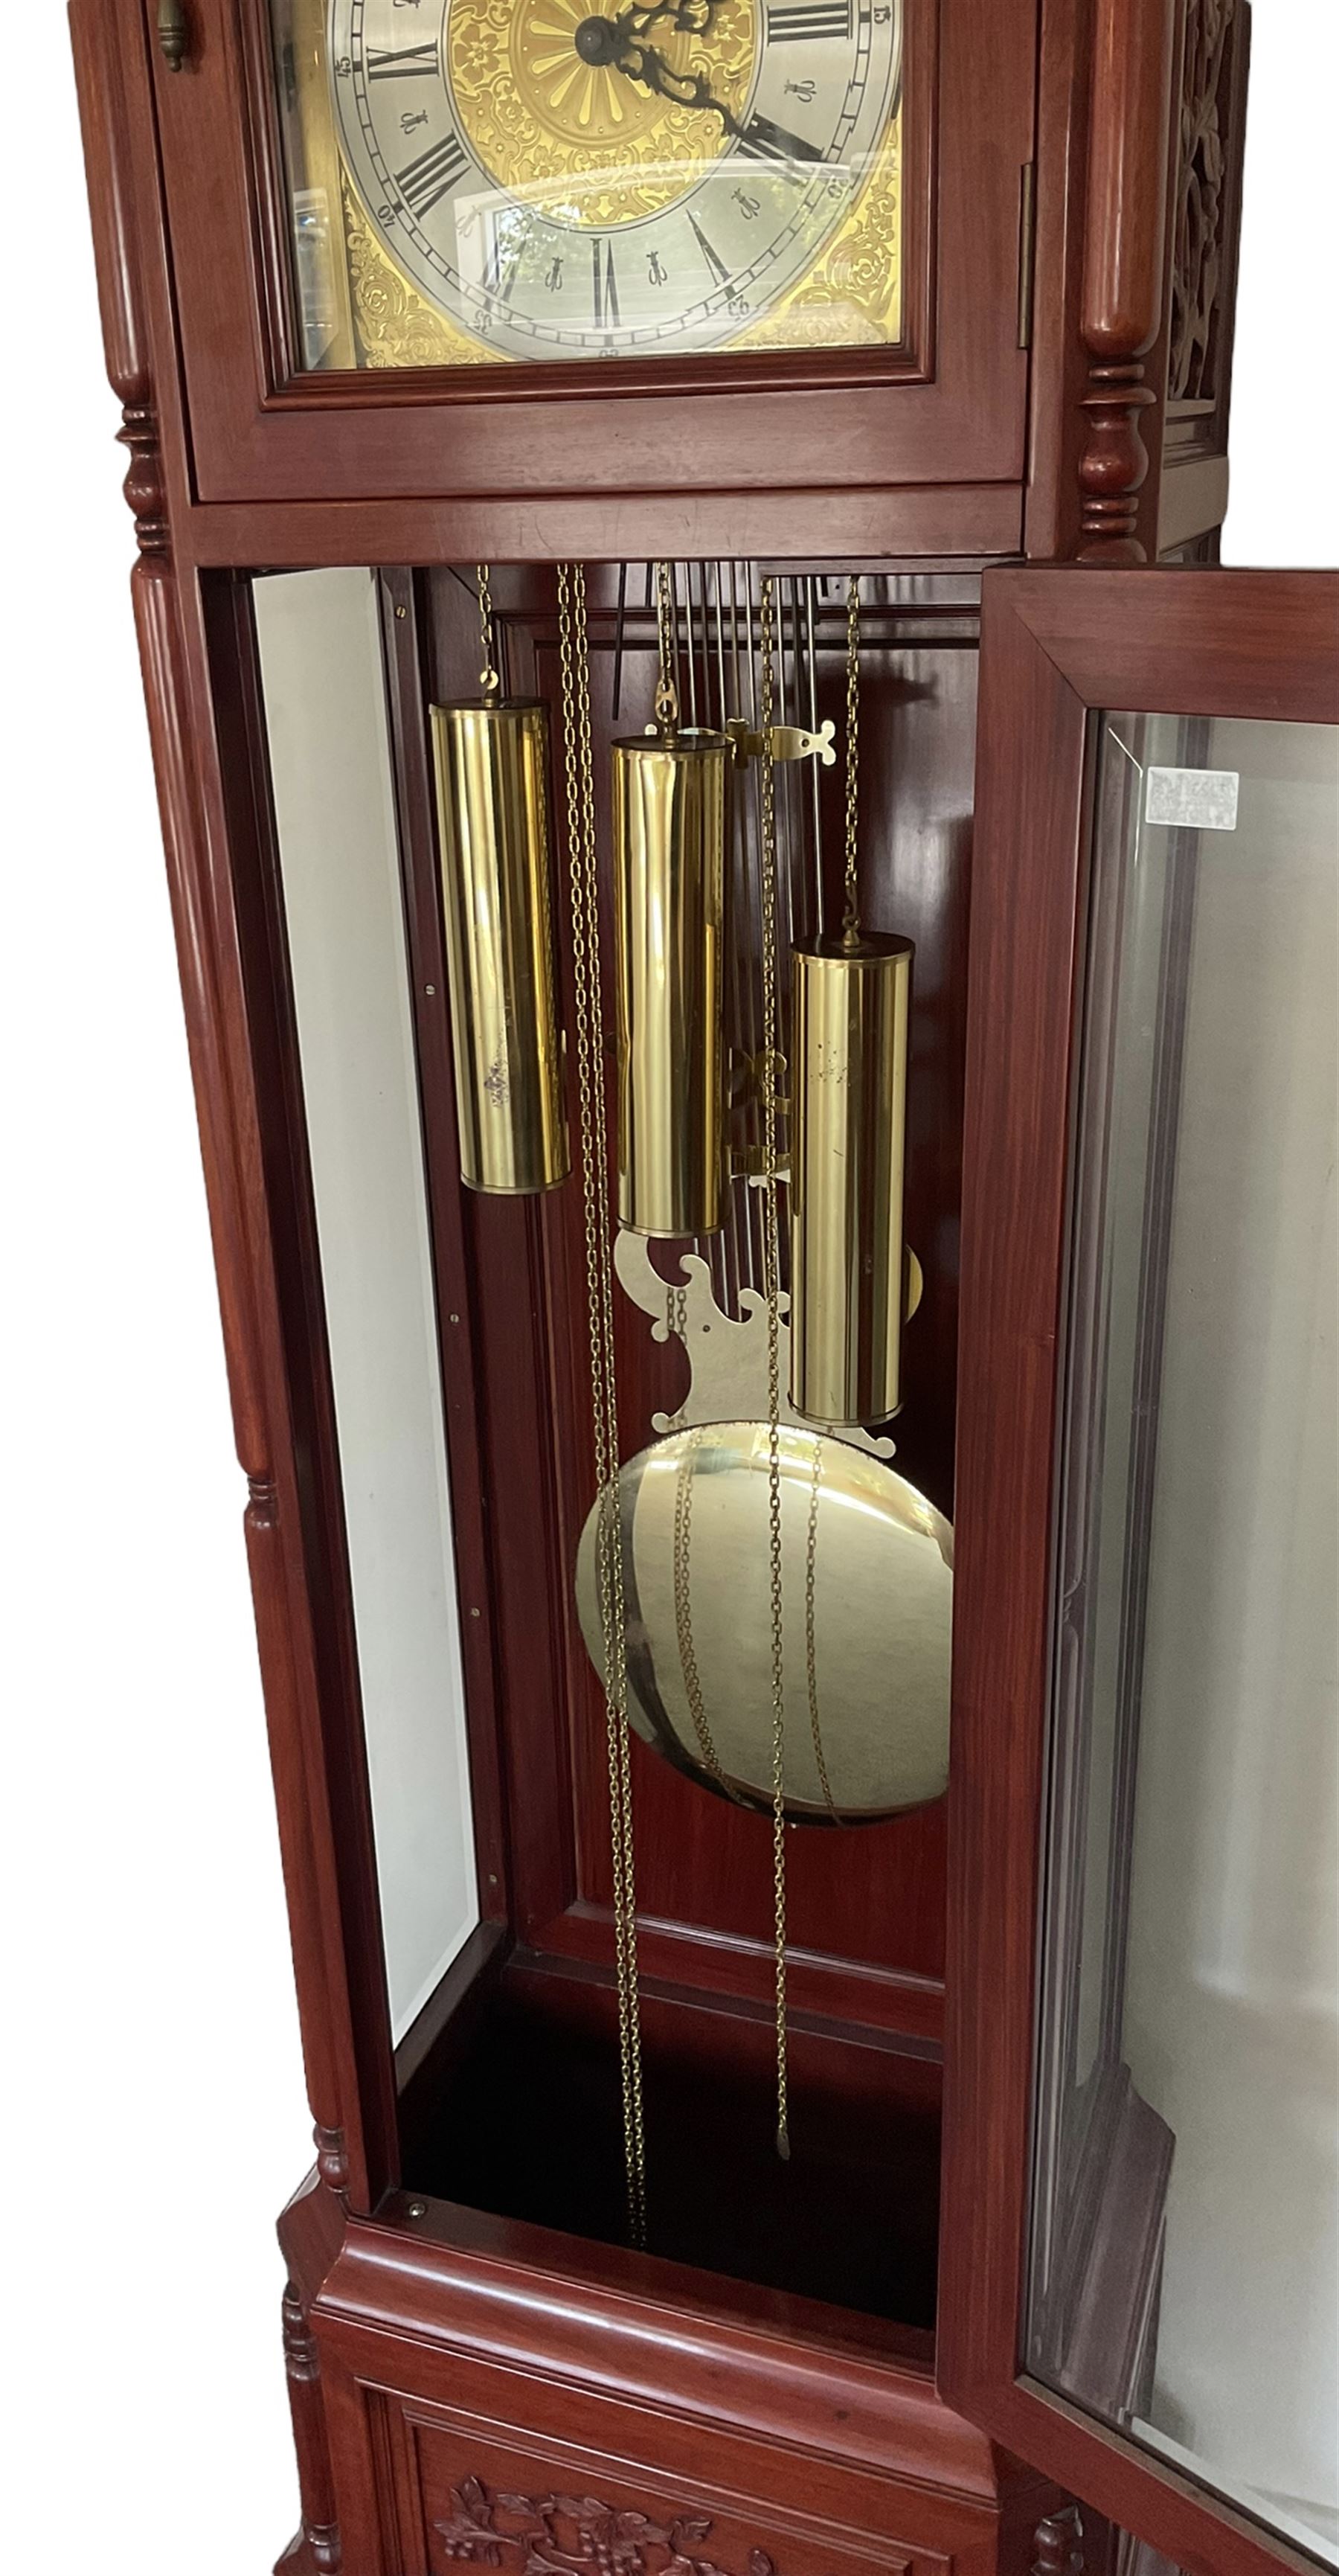 An impressive 20th century longcase clock in a mahogany case with an arched pediment - Image 4 of 4